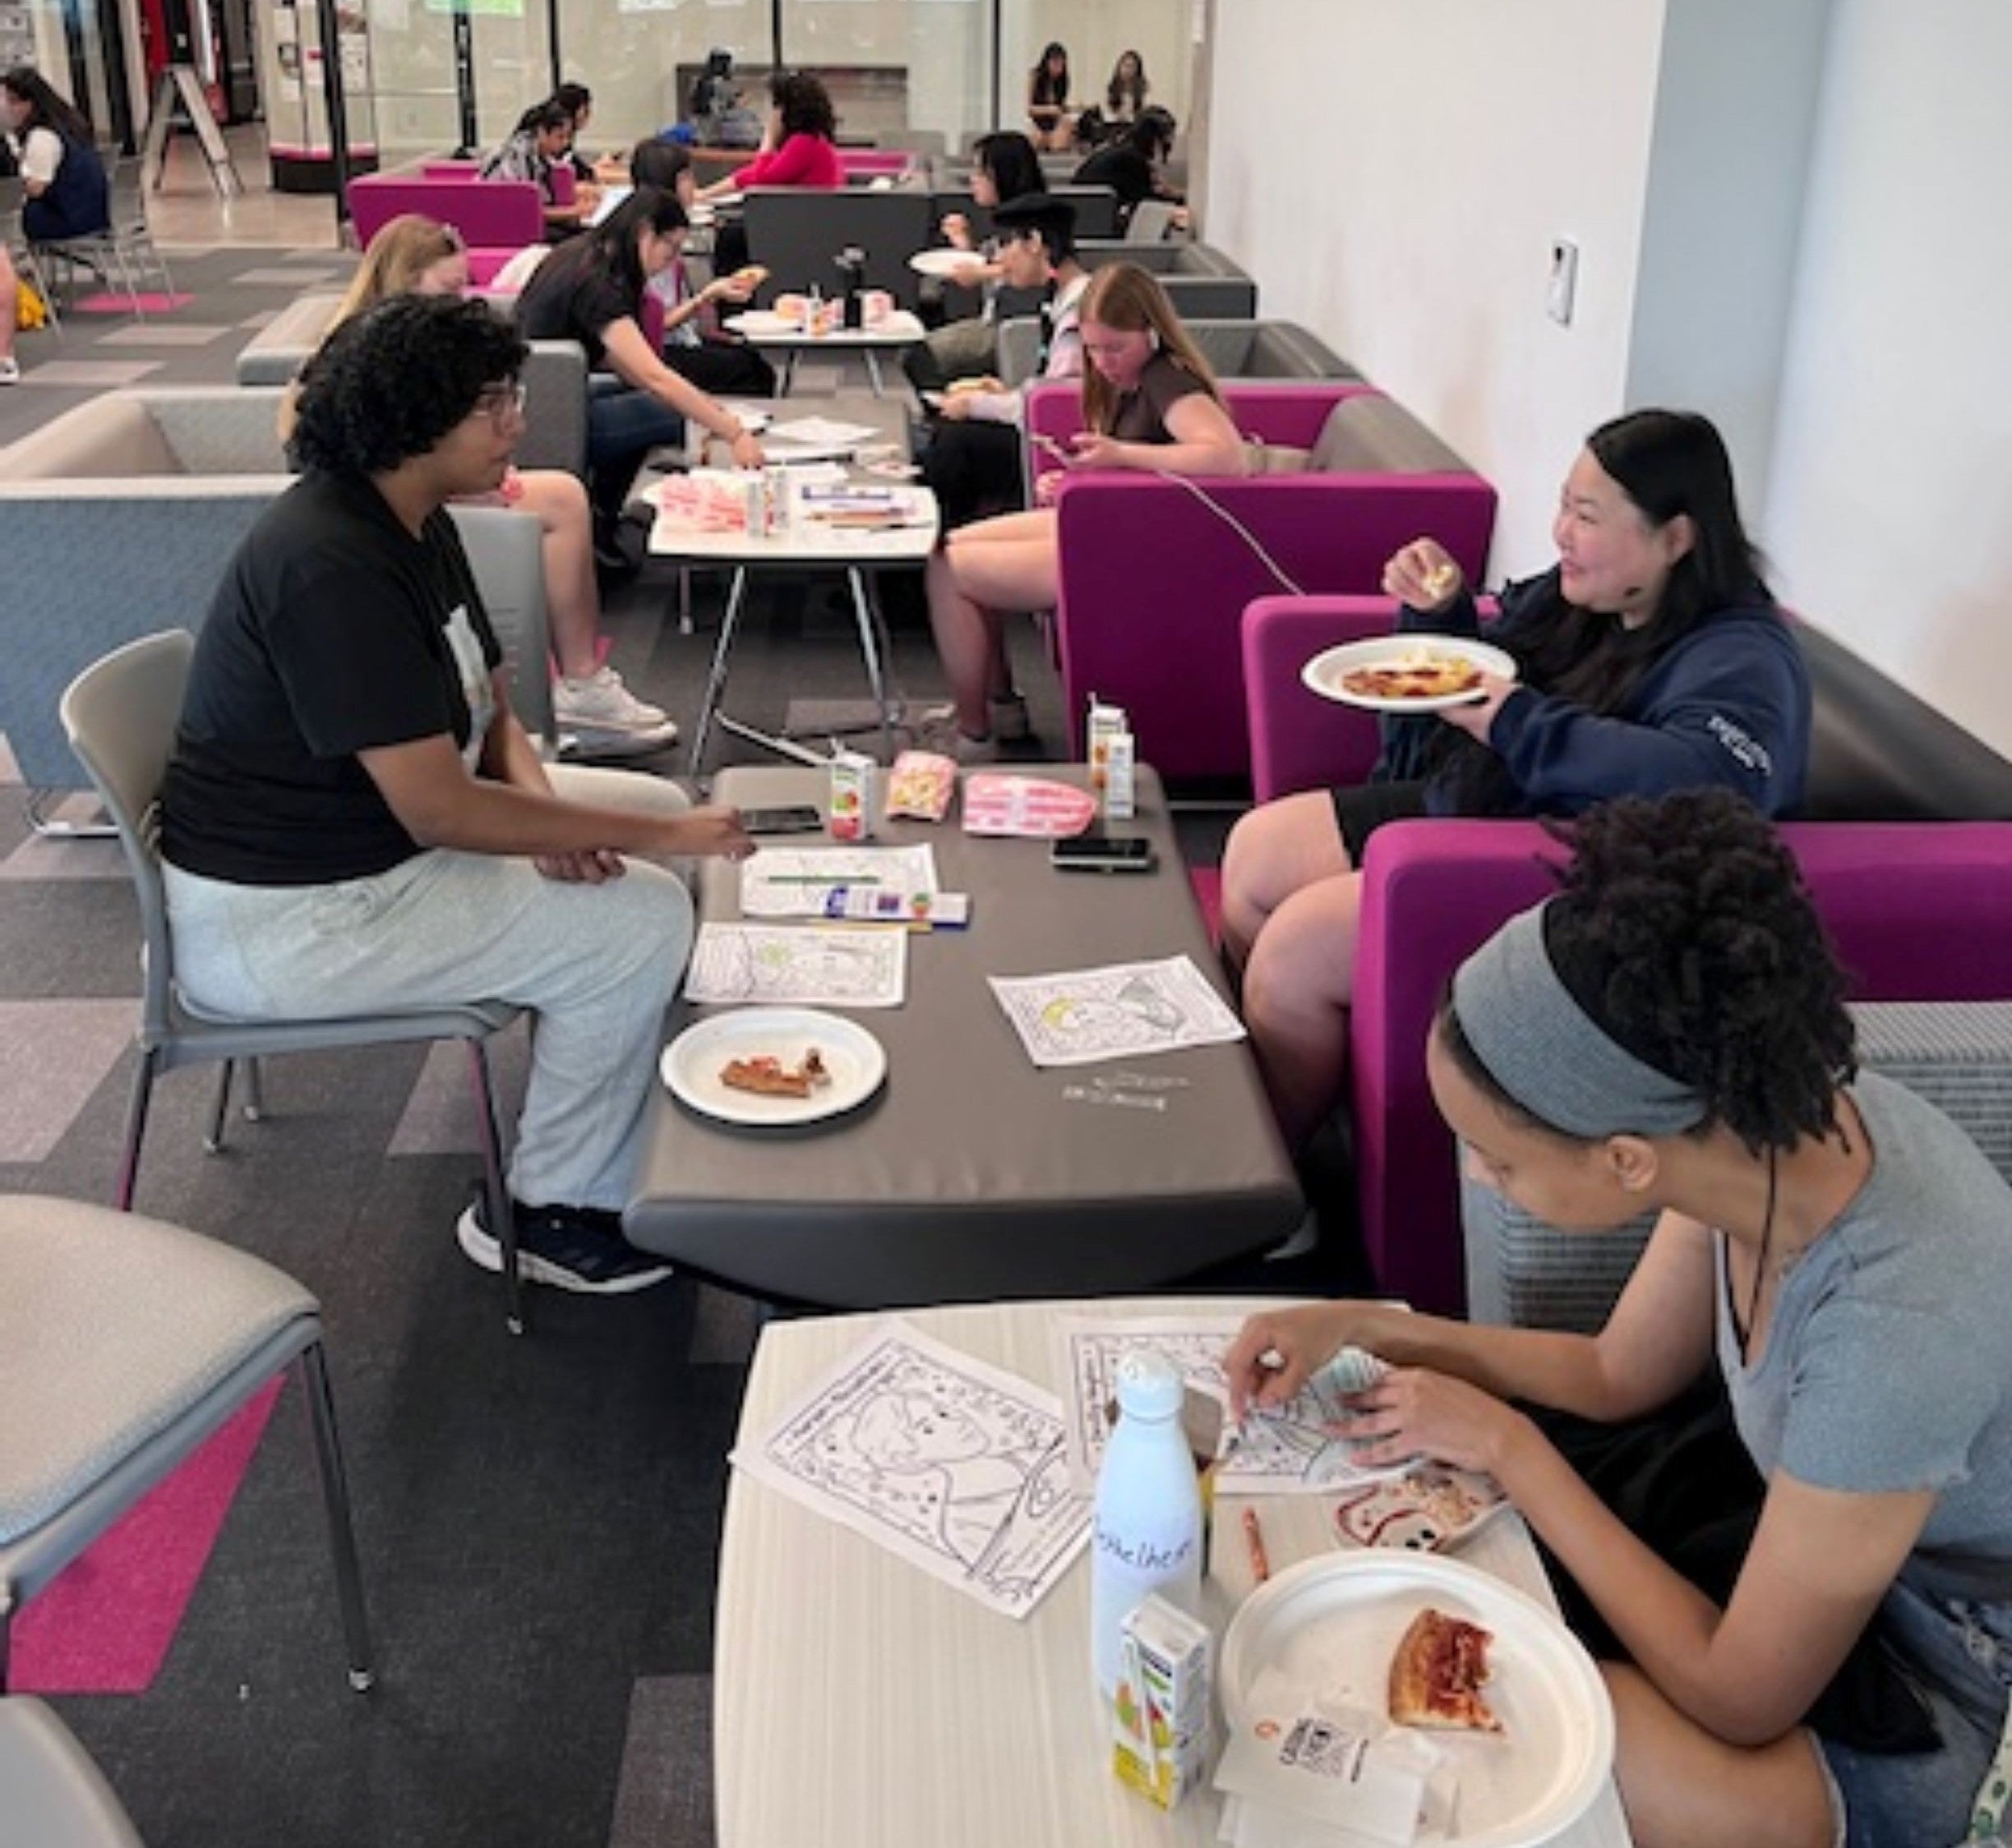 Students colouring and eating pizza